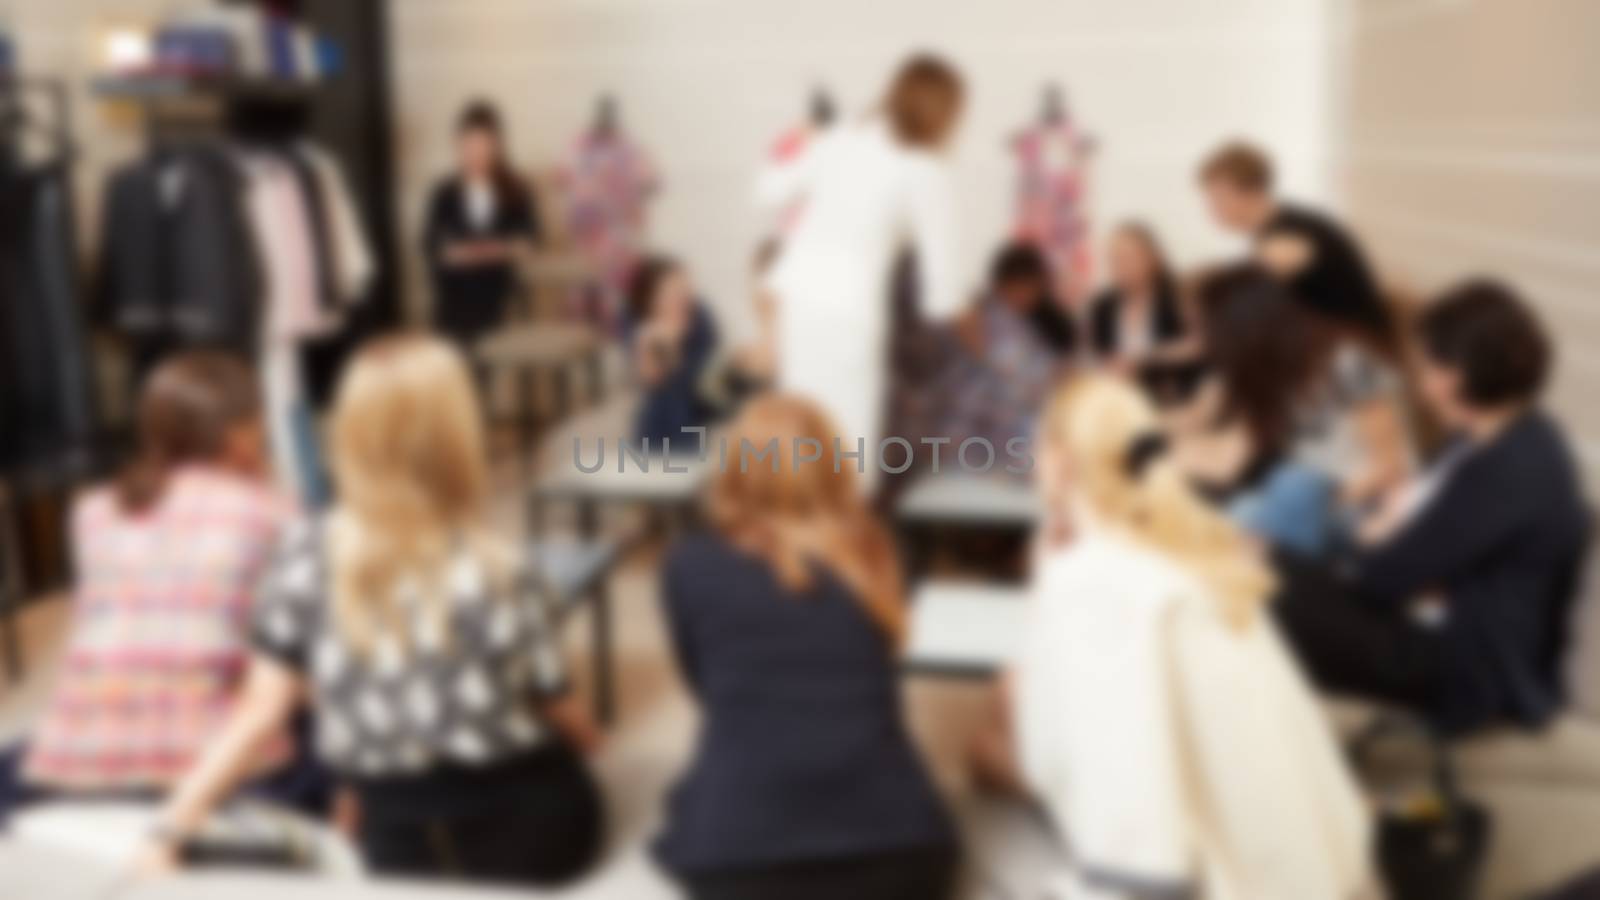 blurred image of shopping mall and people. Blur background